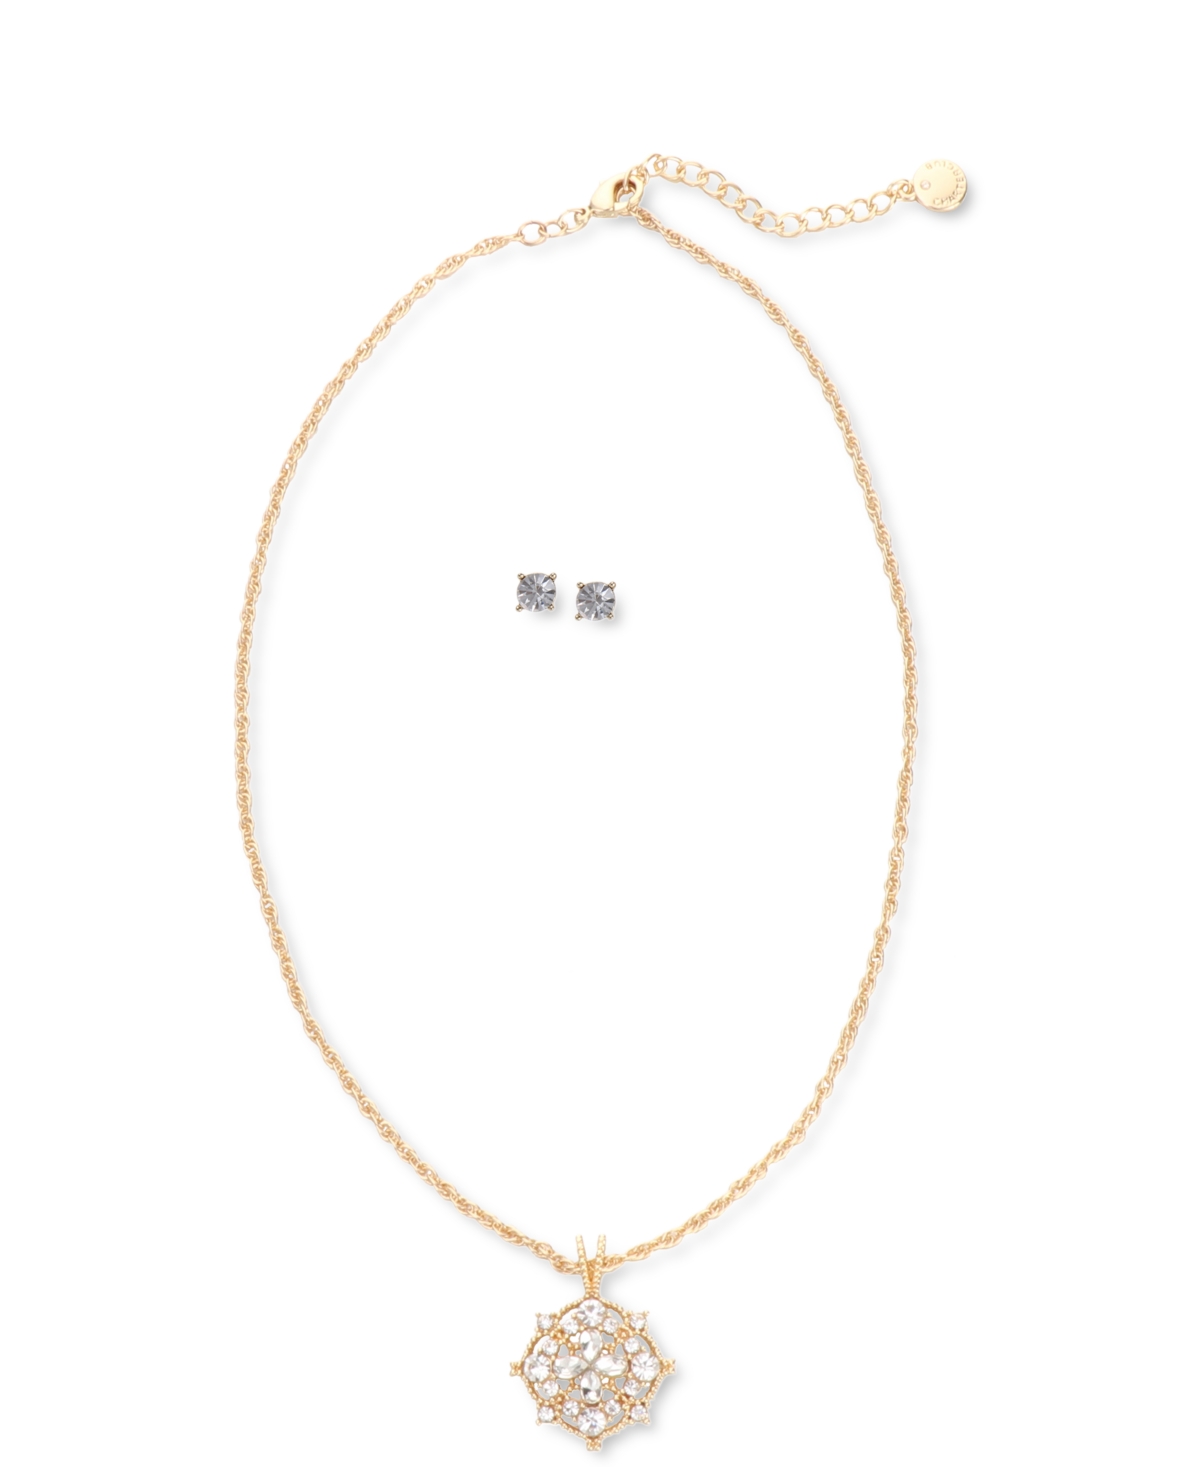 Charter Club Gold-Tone Crystal Filigree Pendant Necklace & Stud Earrings Set, Created for Macy's